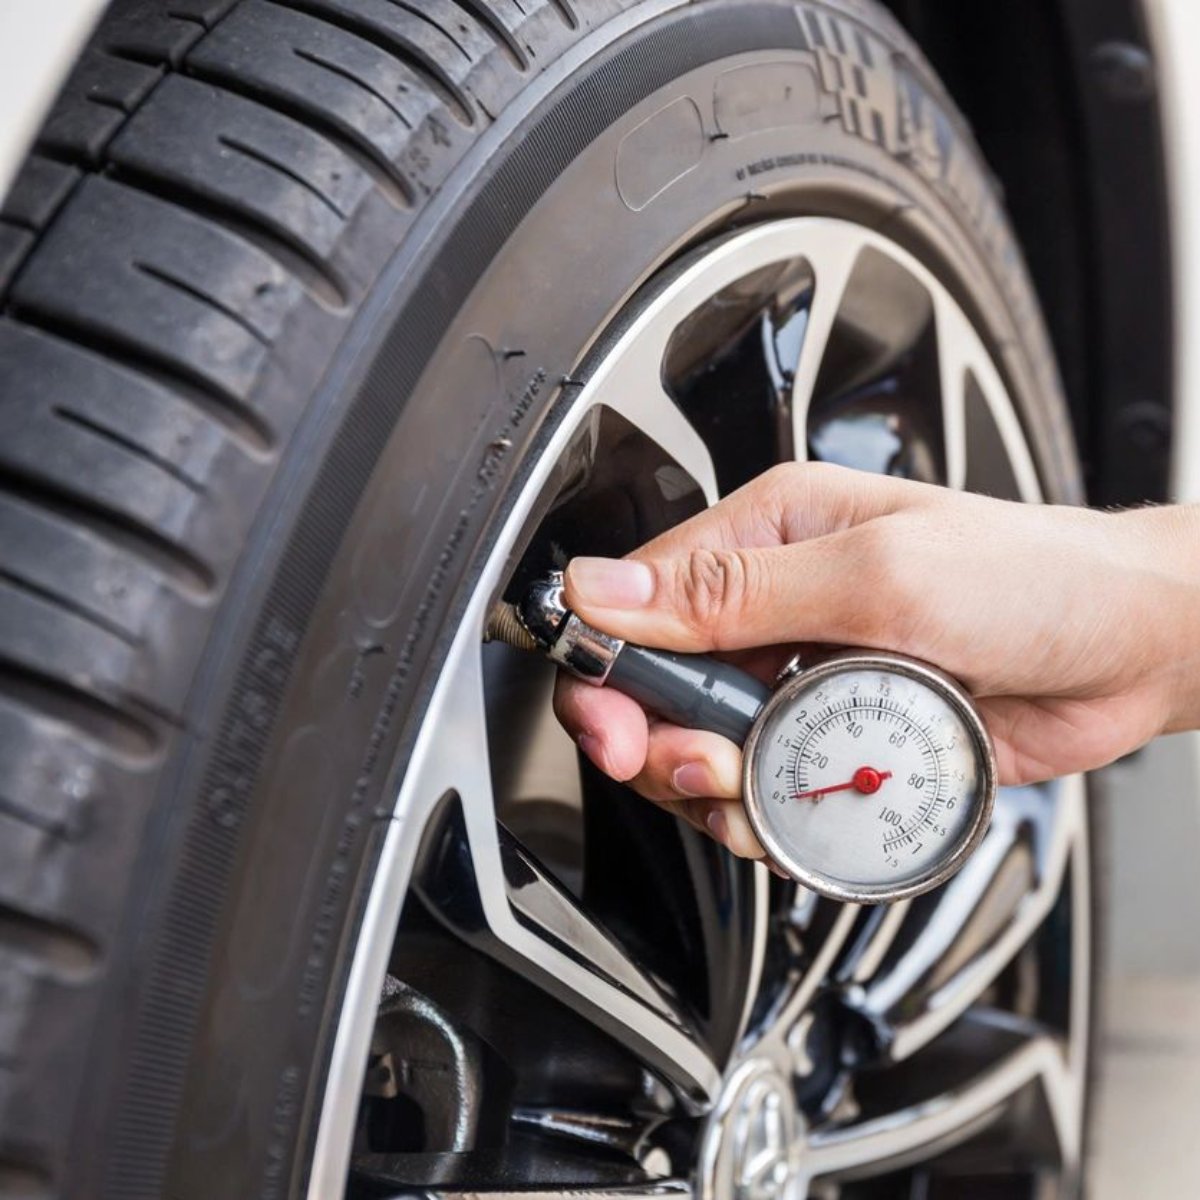 Changes in temperature can cause your car's tire pressure to change too. Make sure to test your levels before long drives this holiday season -- the ideal optimum is between 30 and 35 PSI. https://t.co/tBcAo0K5yO